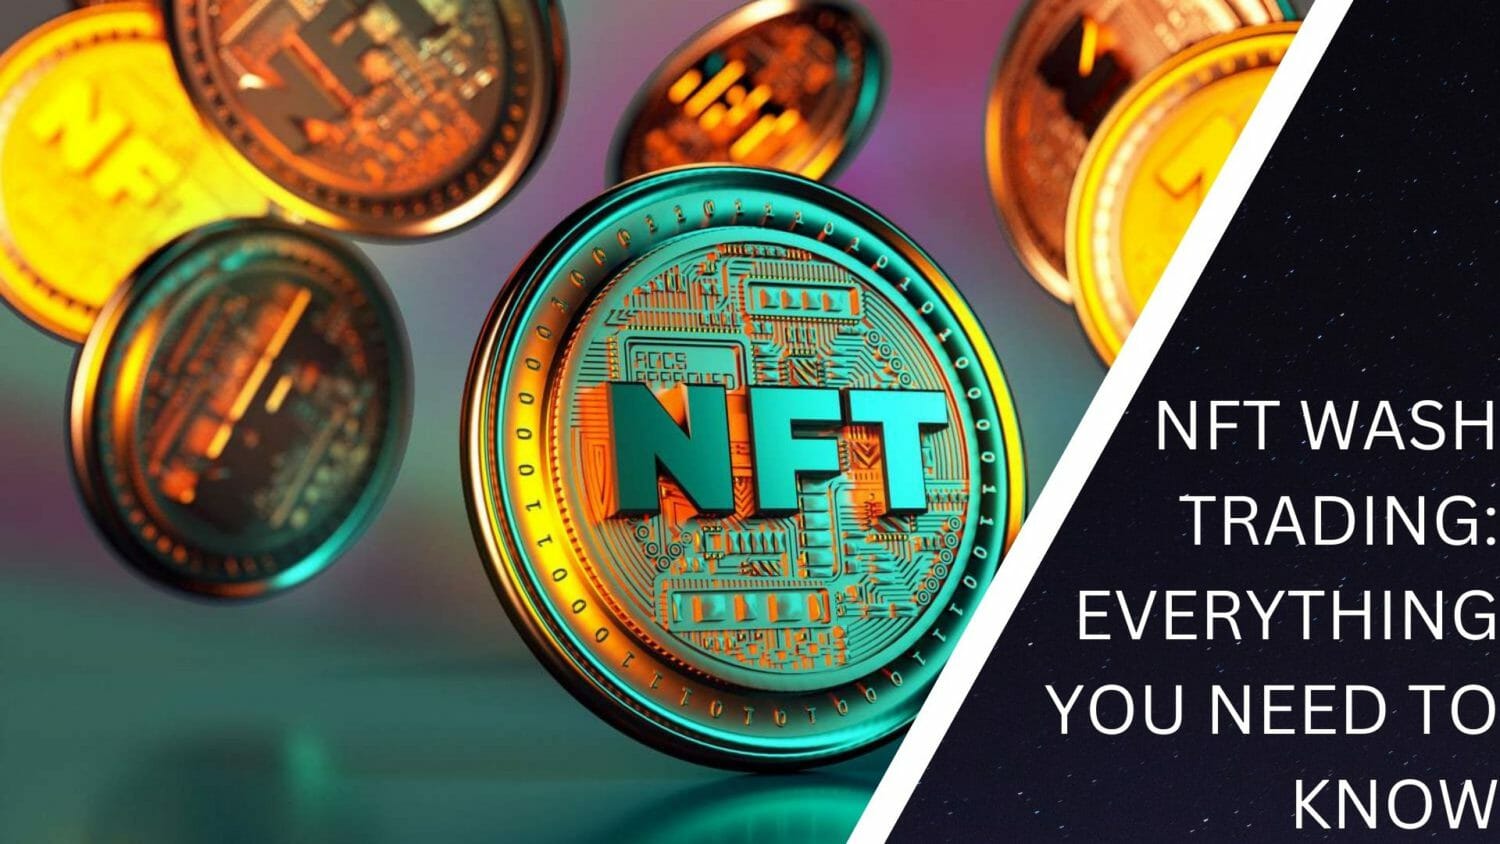 Nft Wash Trading: Everything You Need To Know